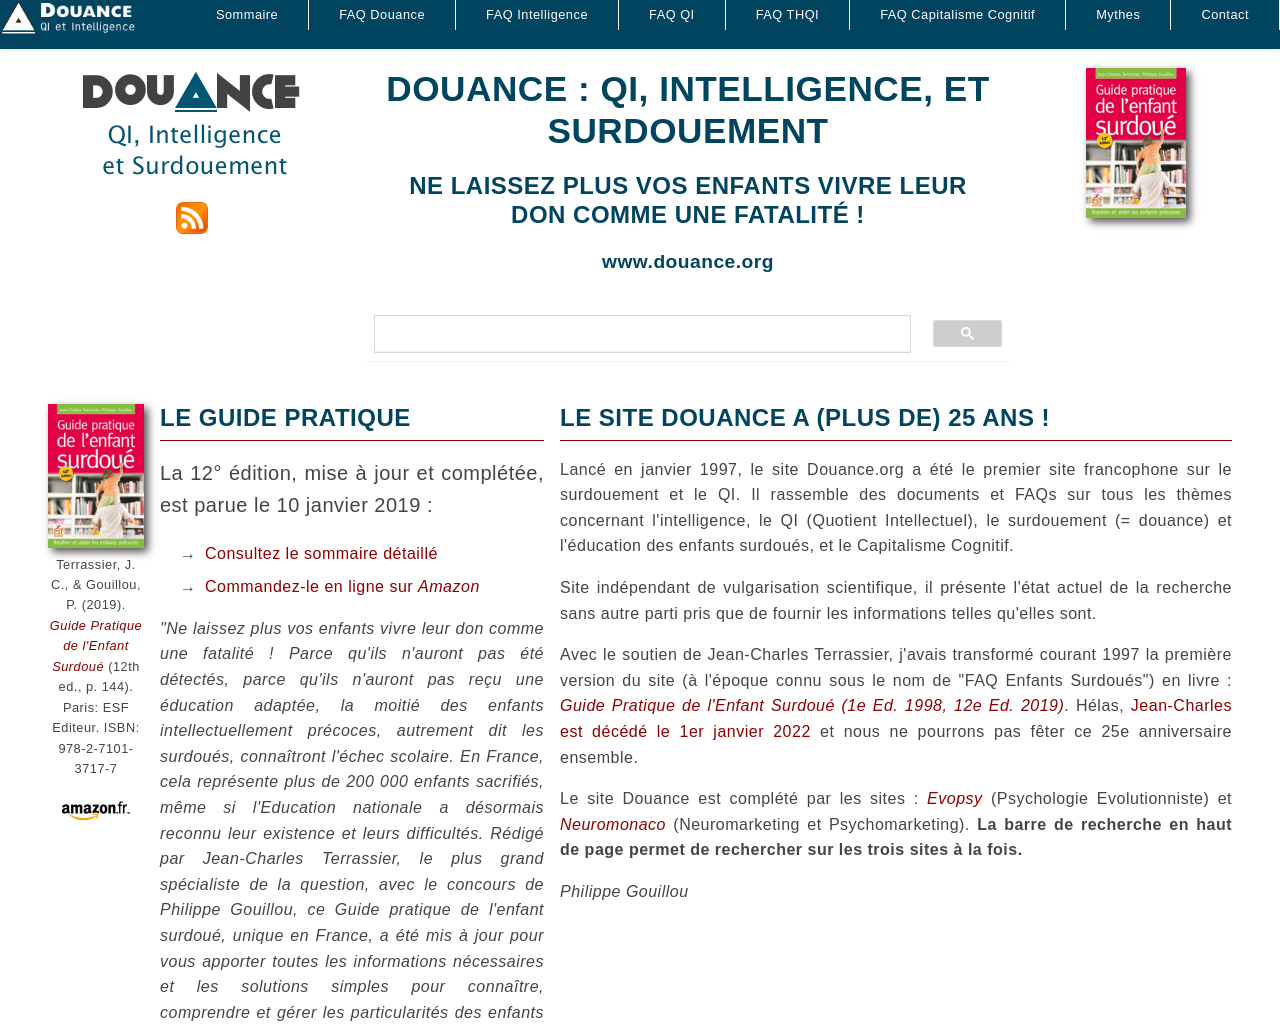 www.douance.org